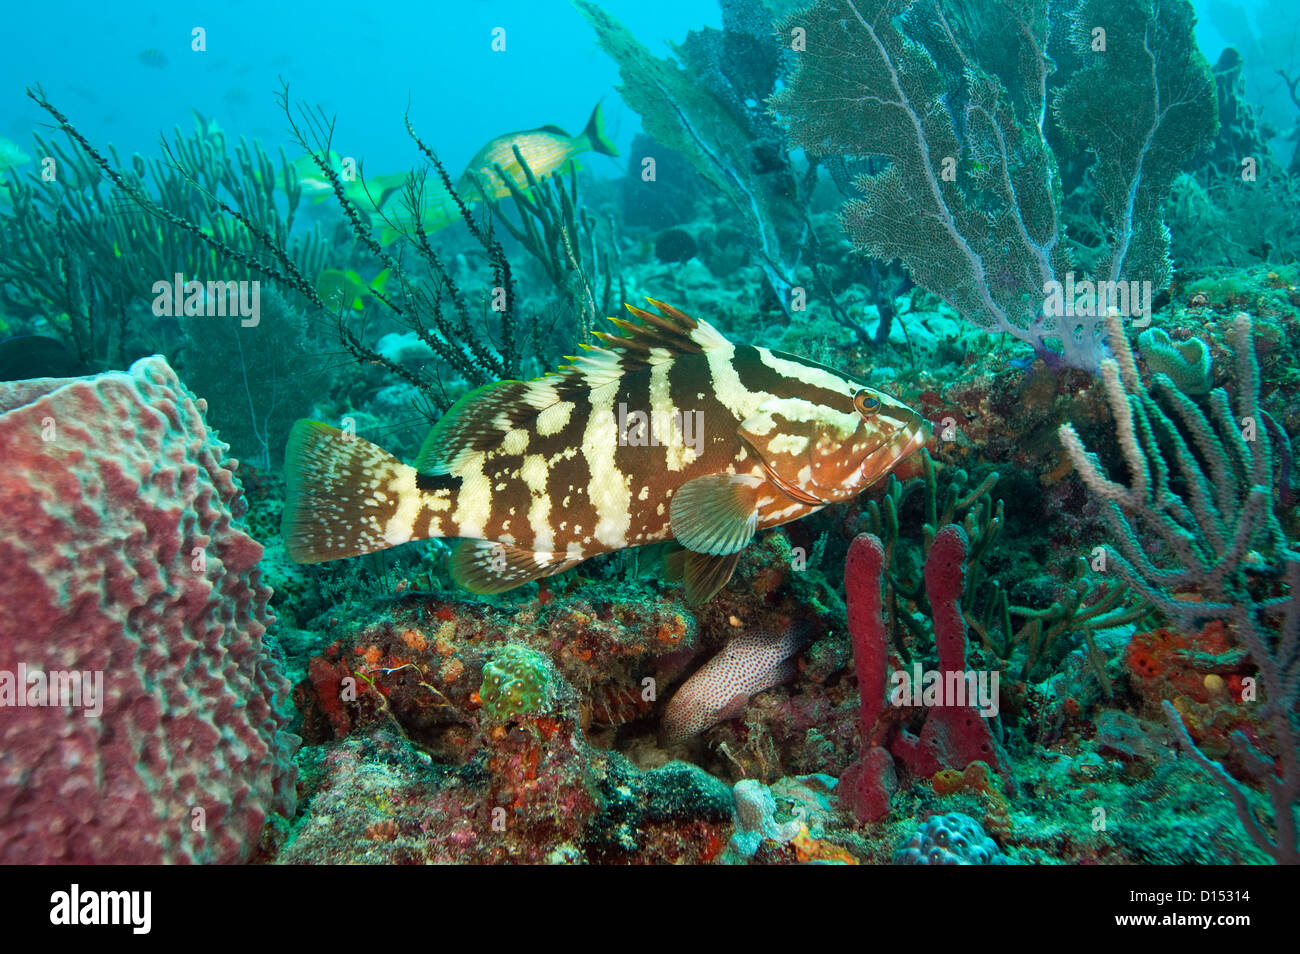 A Nassau Grouper, Epinephelus striatus, a protected and endangered species, swims over a coral reef offshore Palm Beach, Florida Stock Photo